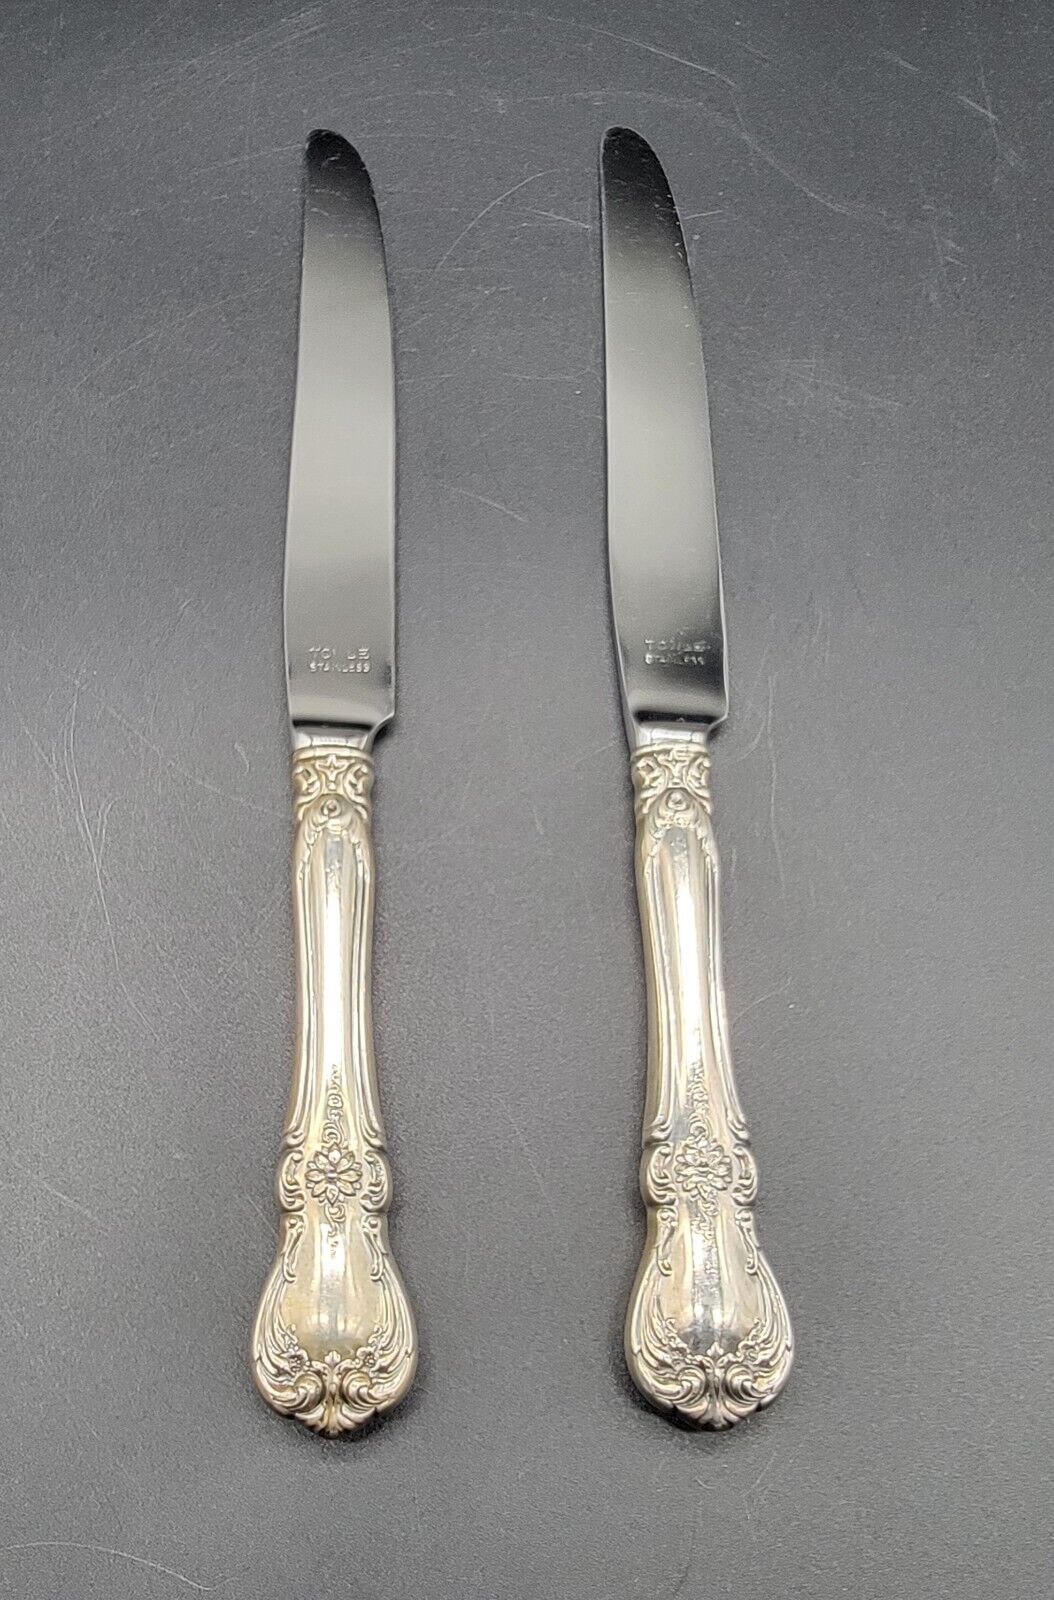 OLD MASTER by TOWLE - Sterling Silver Handle Knives  (2)